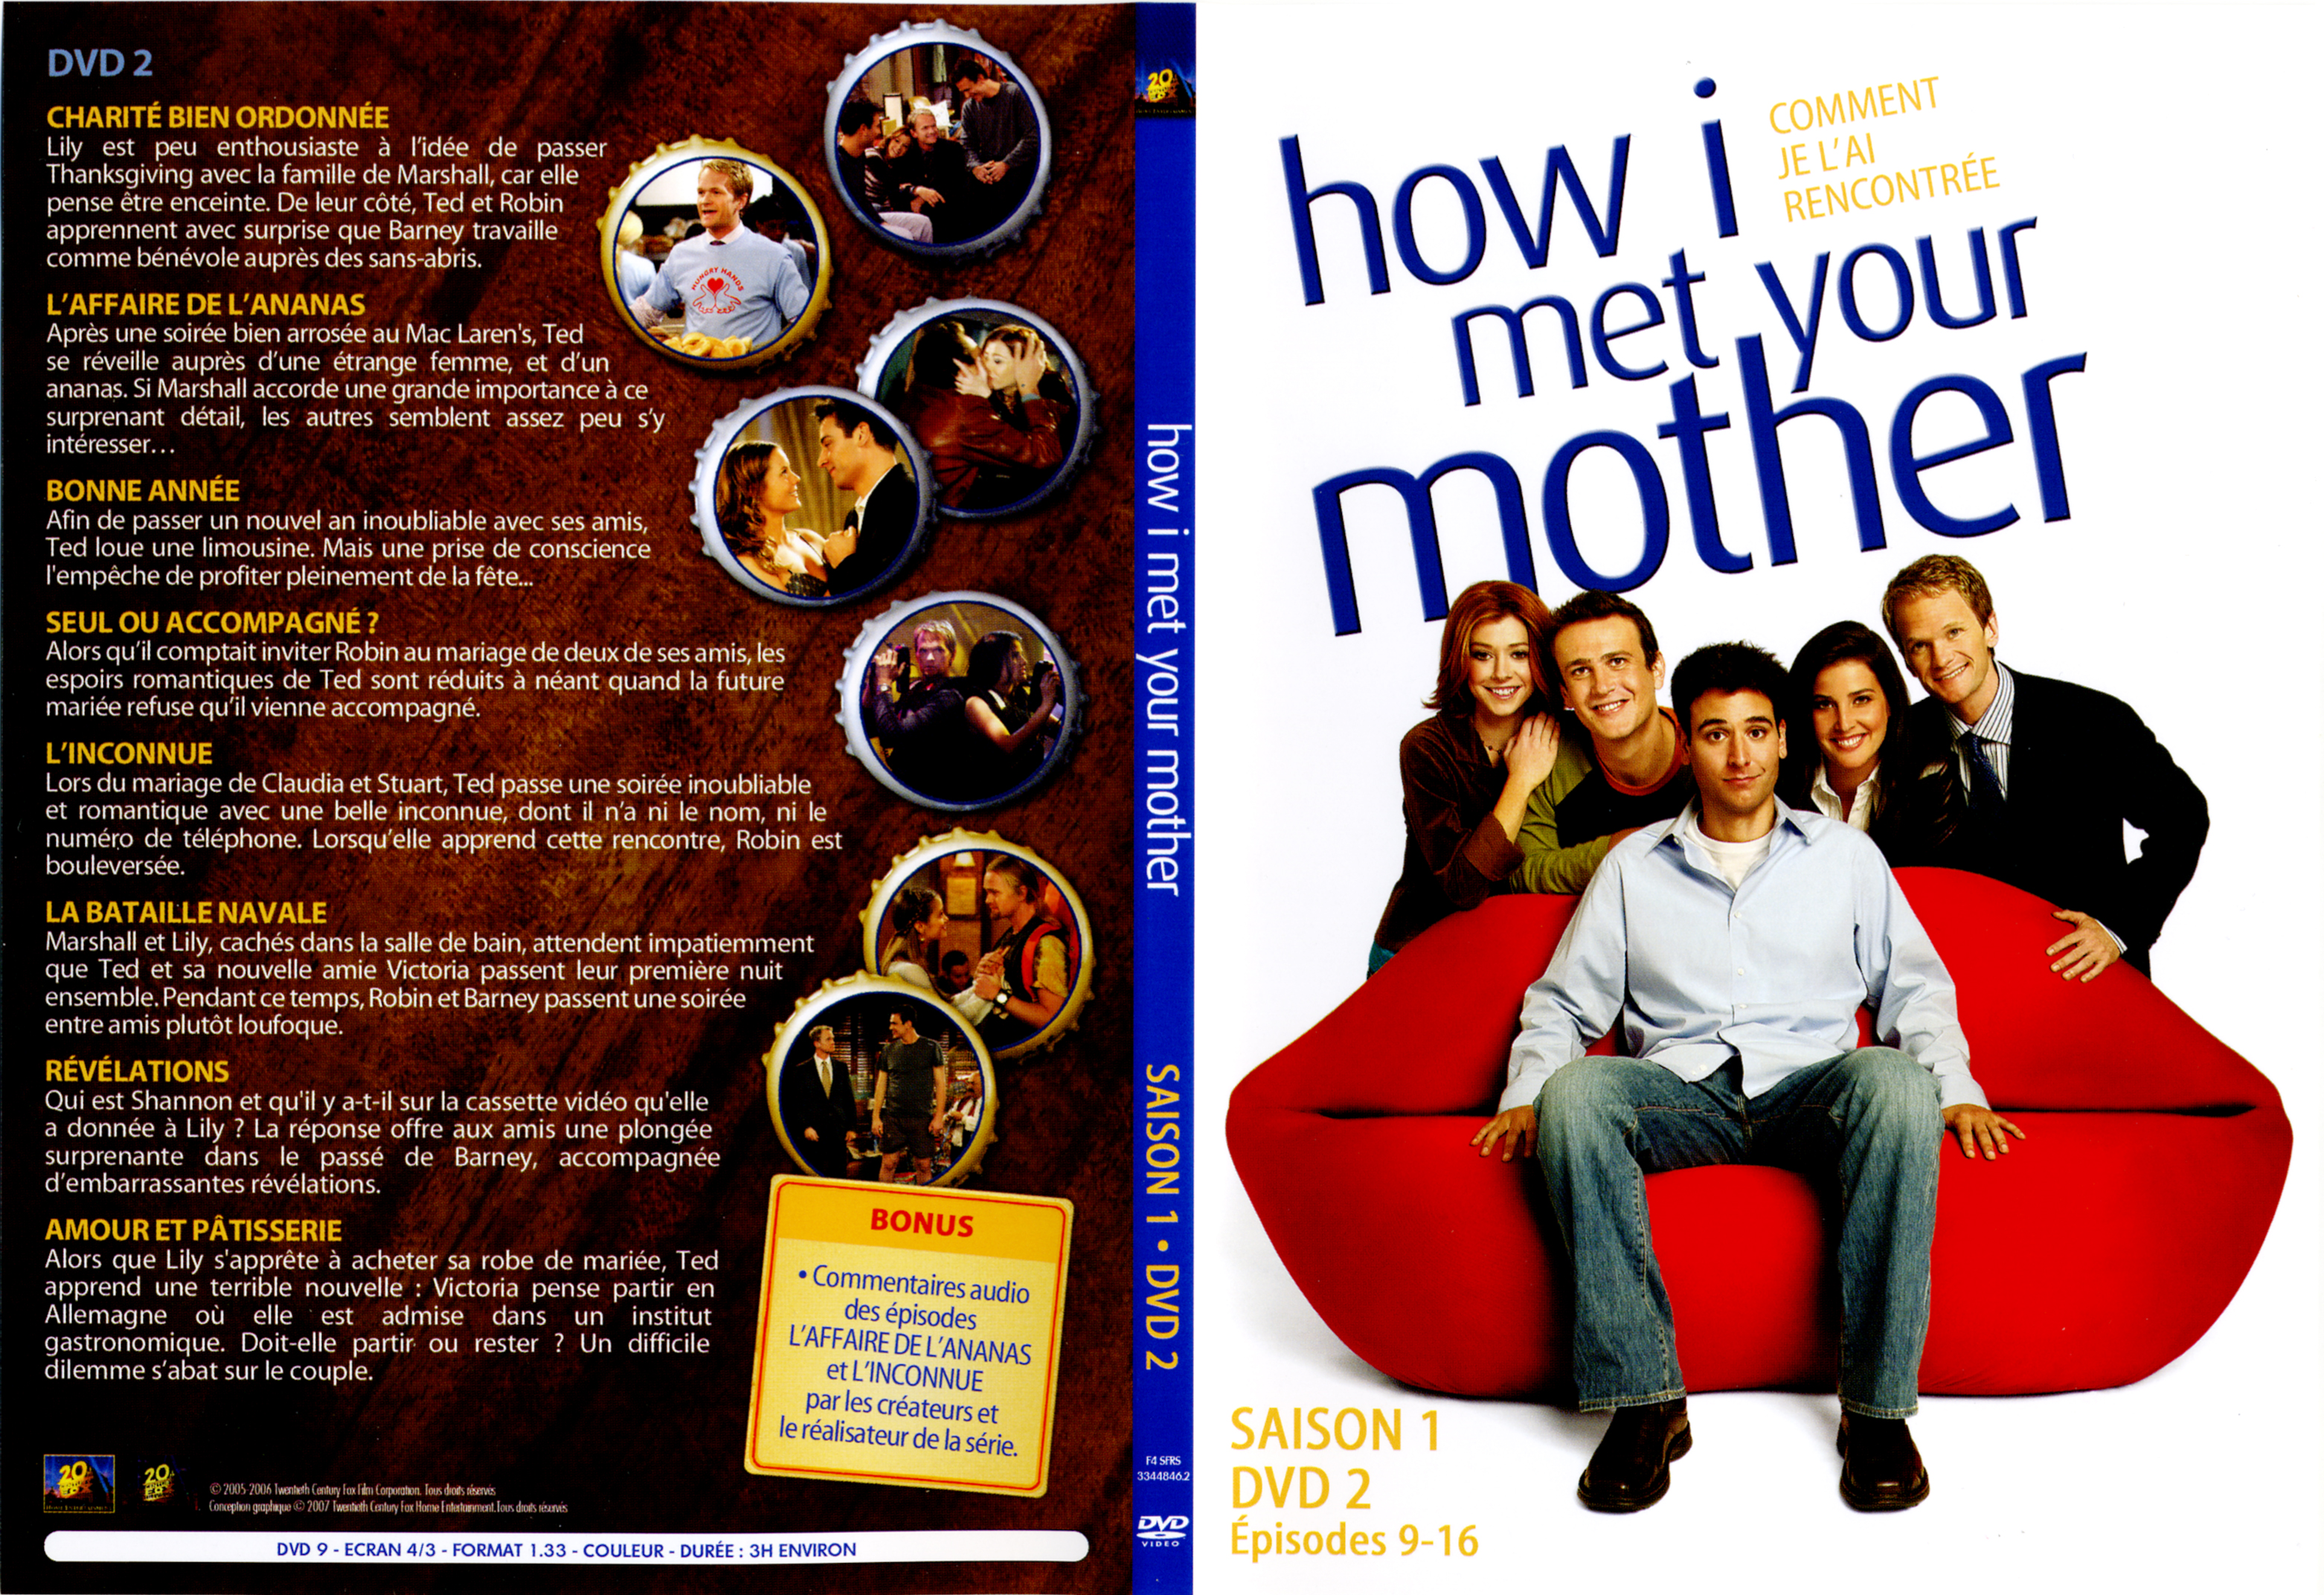 Jaquette DVD How i met your mother Saison 1 DVD 2